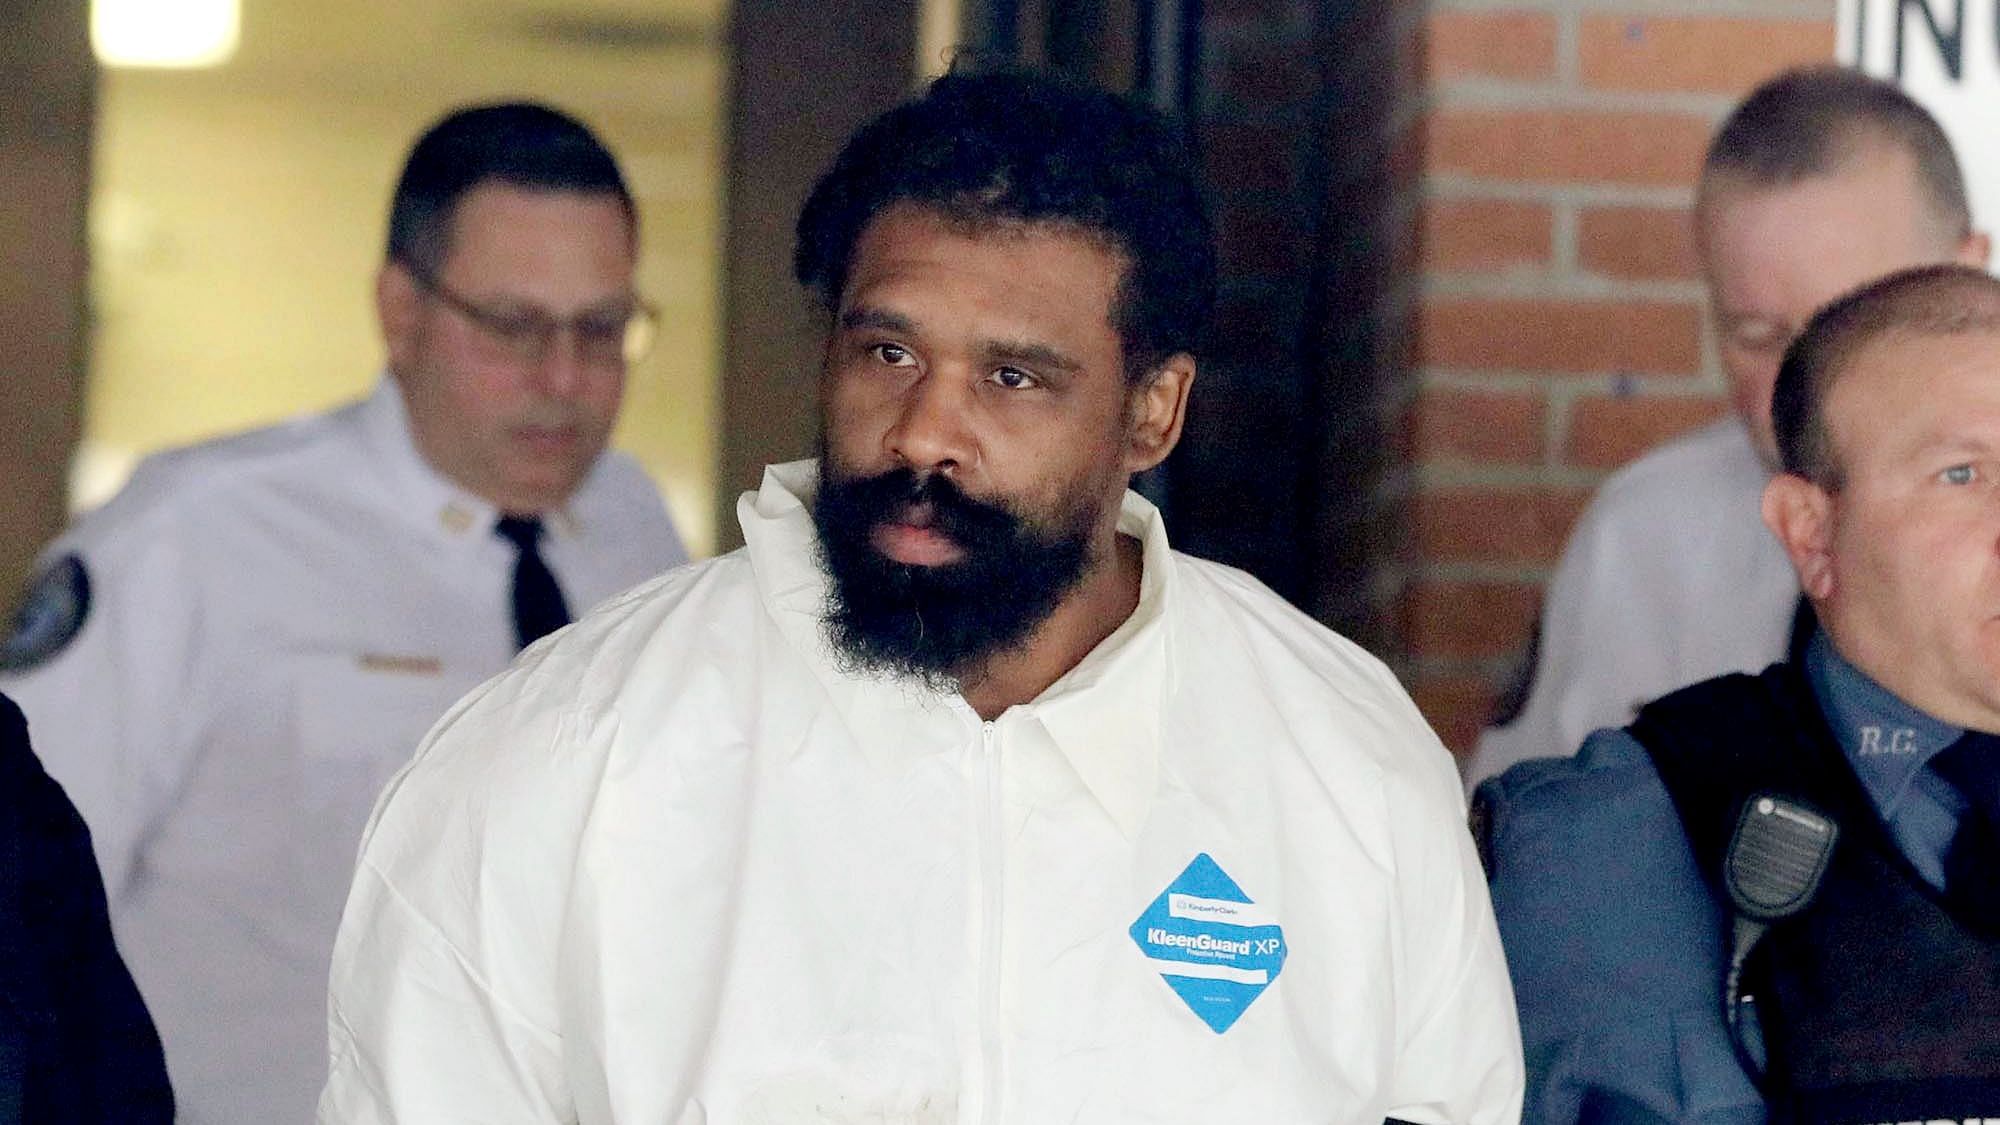 Grafton Thomas is led from Ramapo Town Hall in Ramapo, NY following his arraignment Sunday, 29 December 2019. Thomas was charged in the stabbings of multiple people as they gathered to celebrate Hanukkah at a rabbi’s home in Monsey, an Orthodox Jewish community north of New York City.